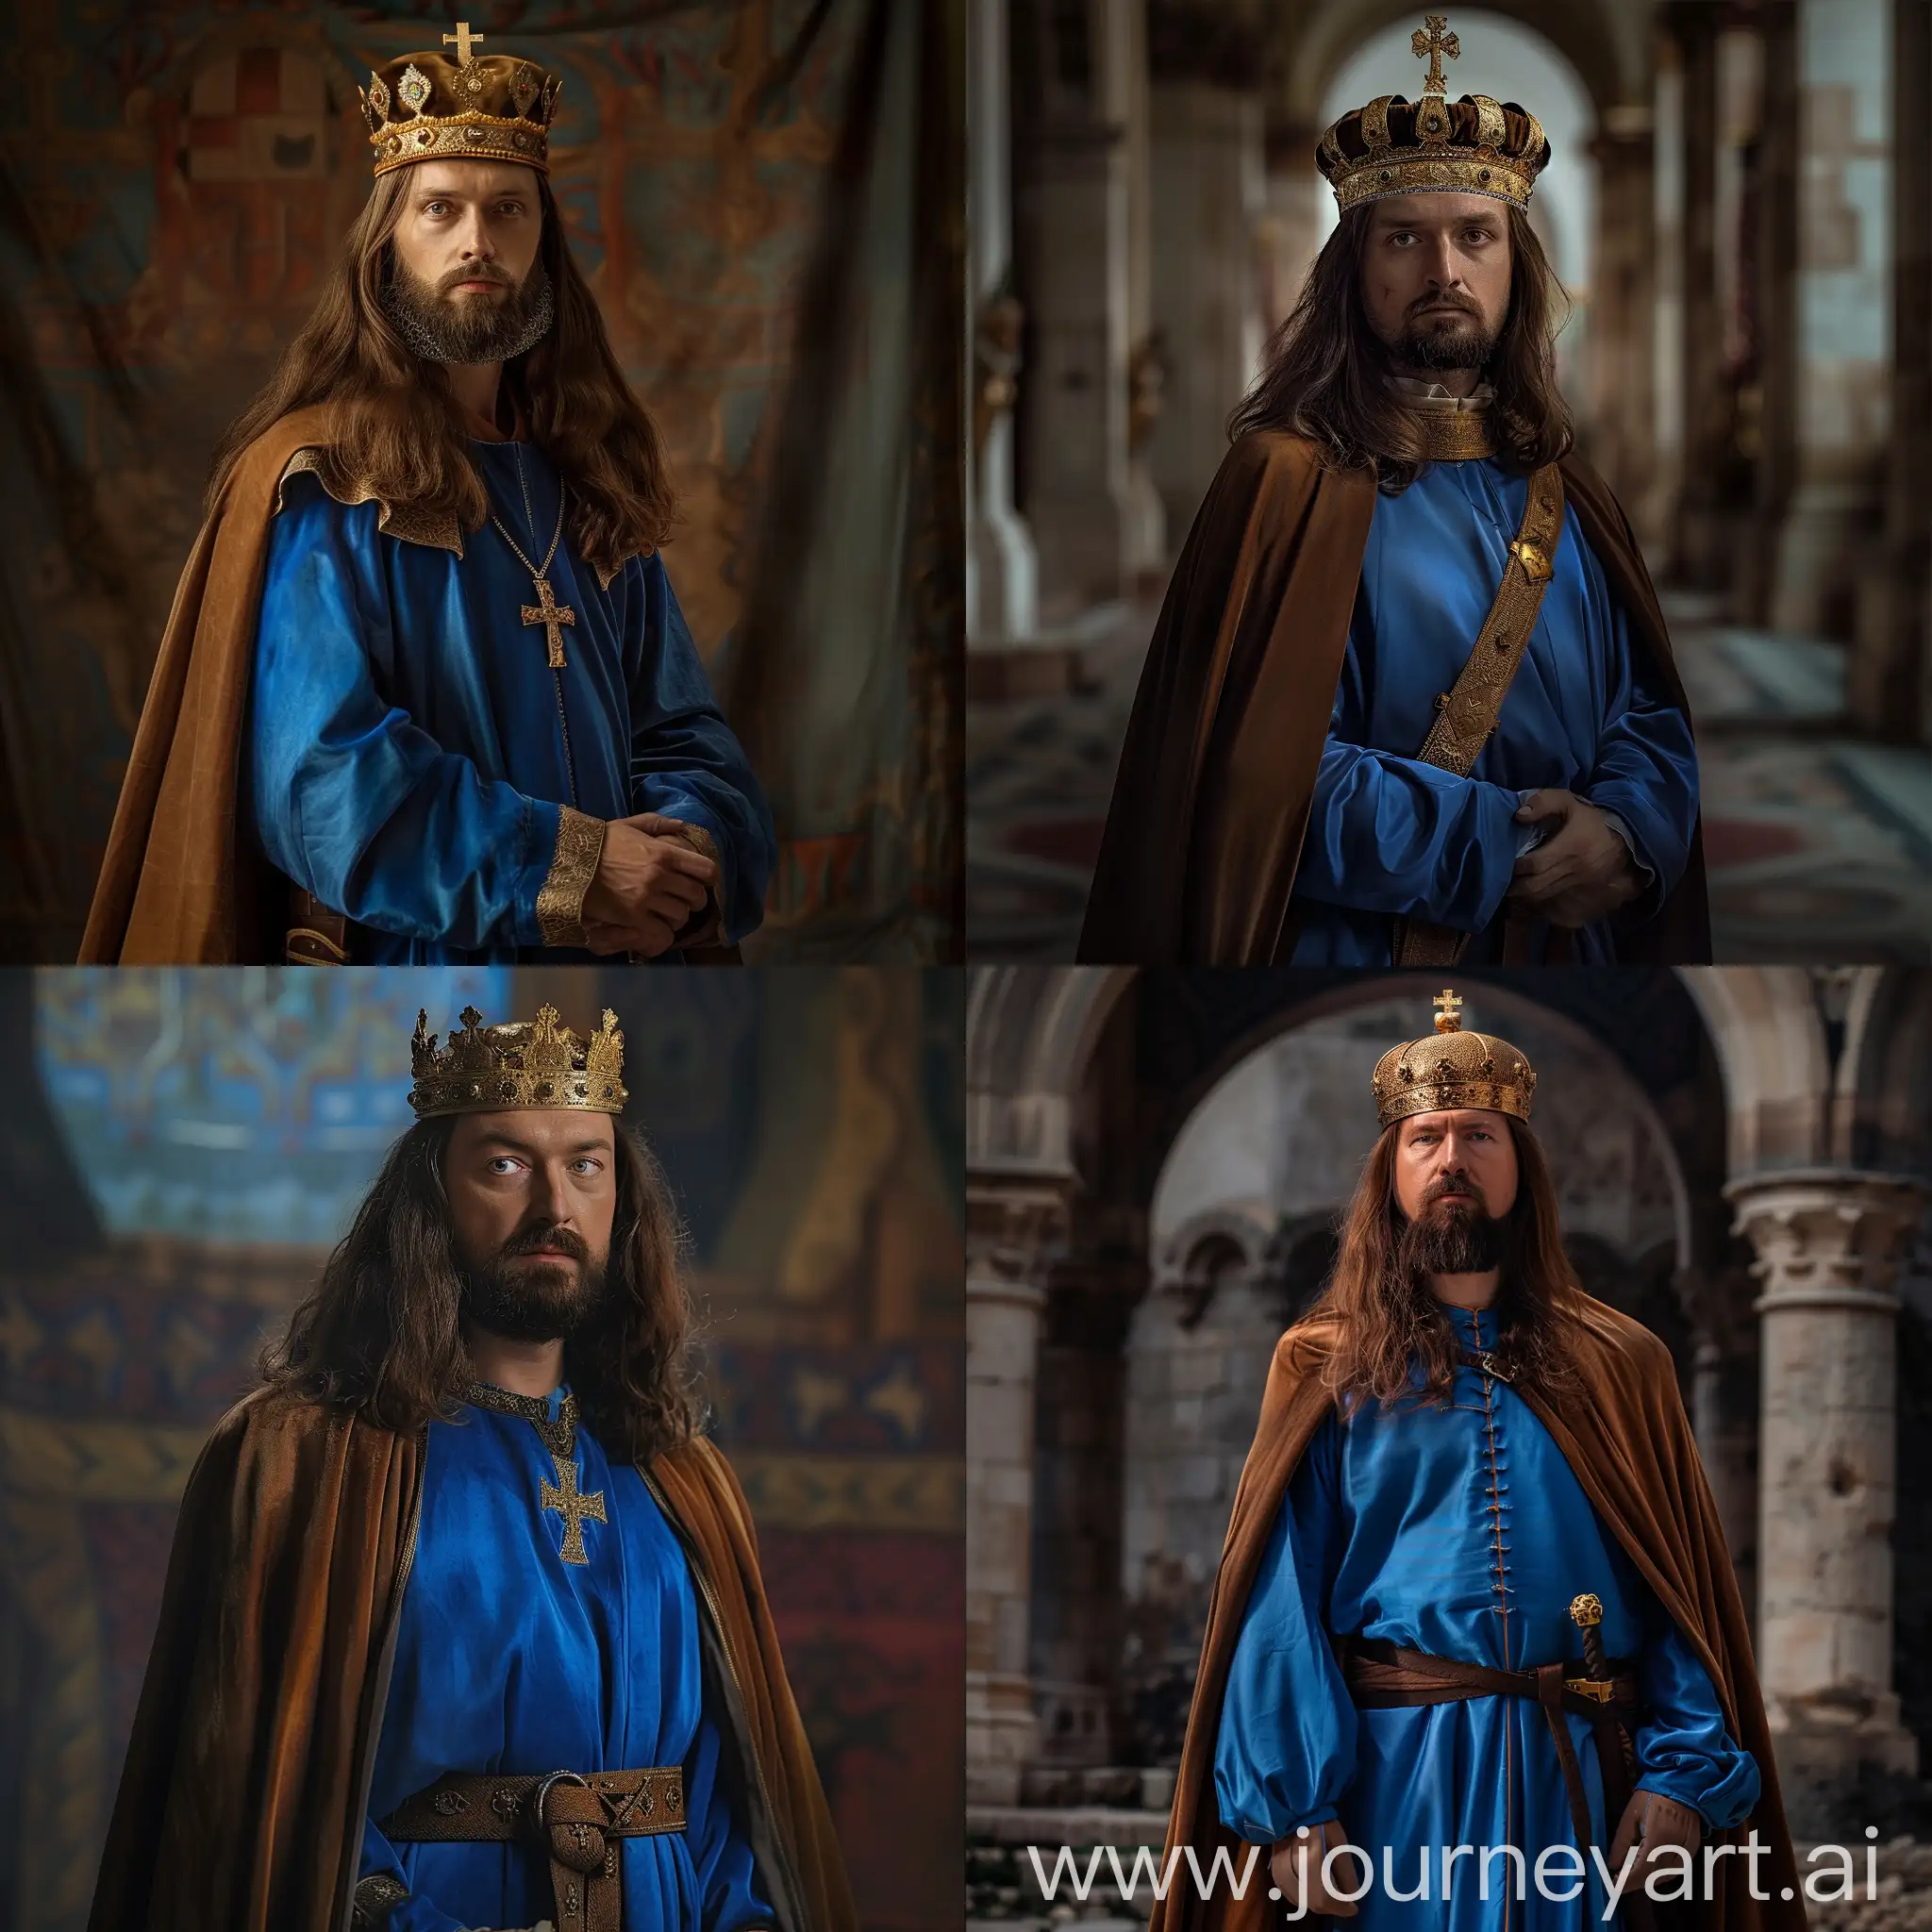 King of Hungary Stephen I, depicted in blue silk
robe and brown cape, wearing golden crown hat of hungary with a small cross on it, long brown hair and
well shaped long beard, at his royal palace, cinematic lighting